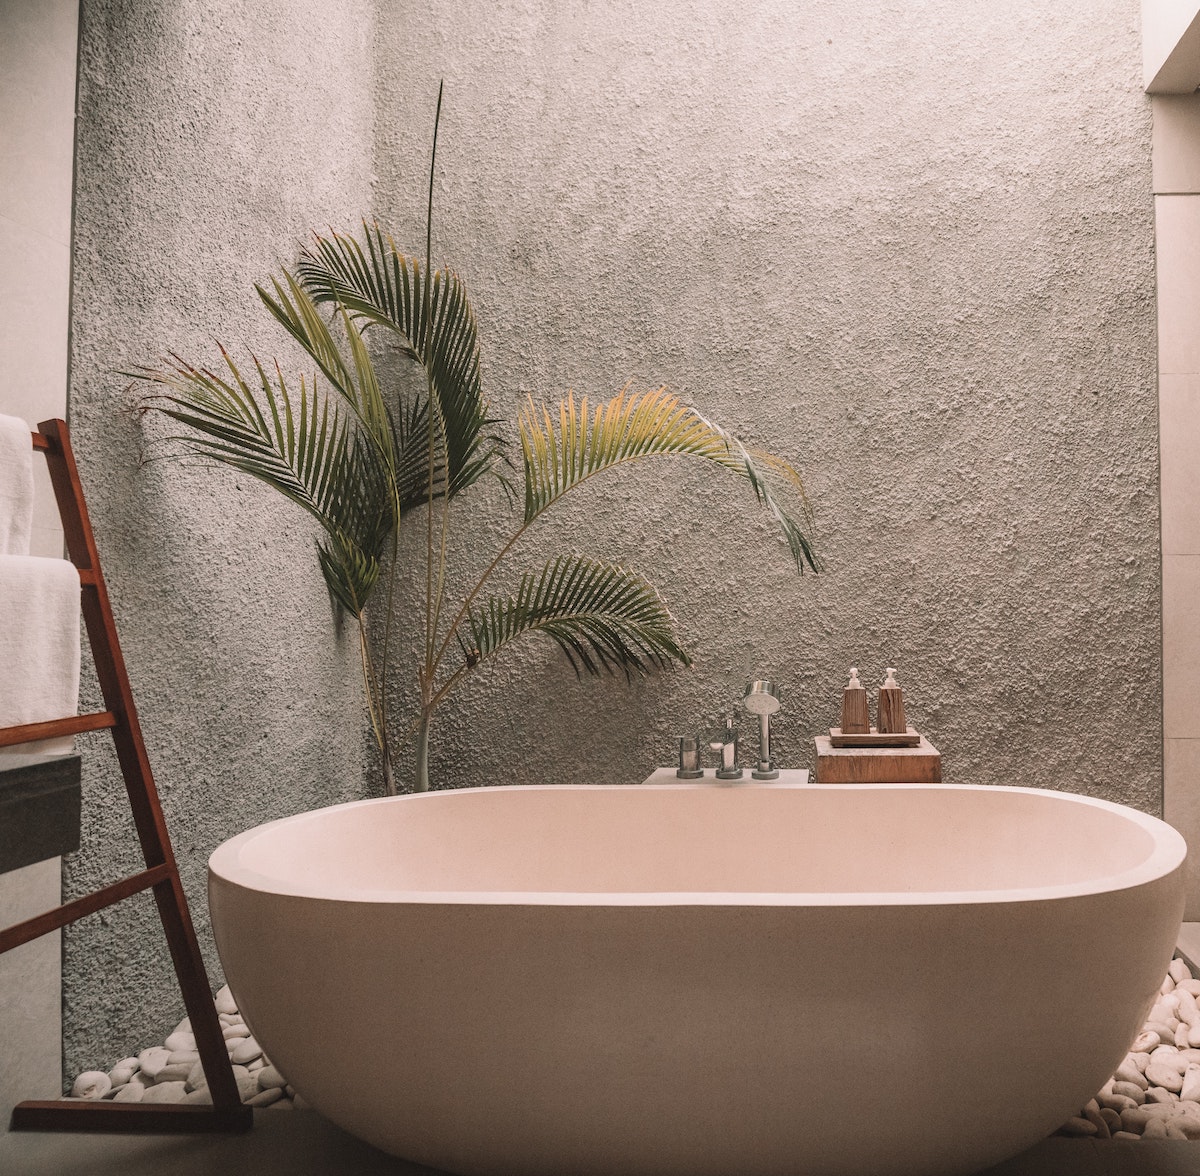 A plant in modern bathroom that has contemporary design